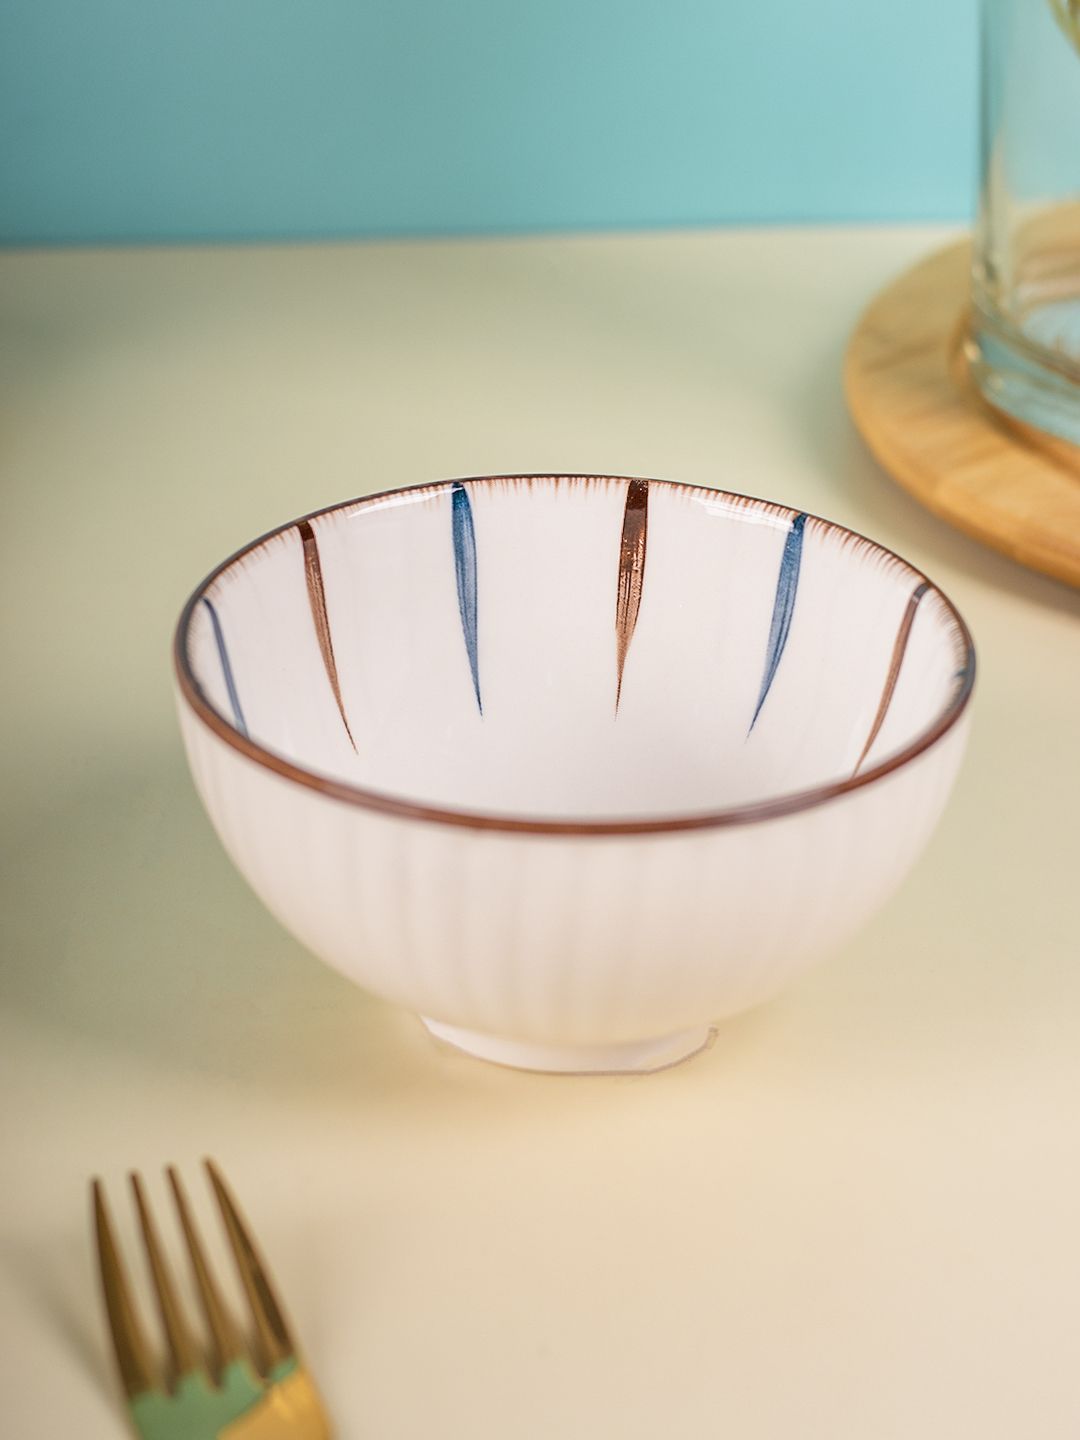 MARKET99 Off White & Blue 1 Pieces Hand Painted Printed Ceramic Glossy Bowls Price in India